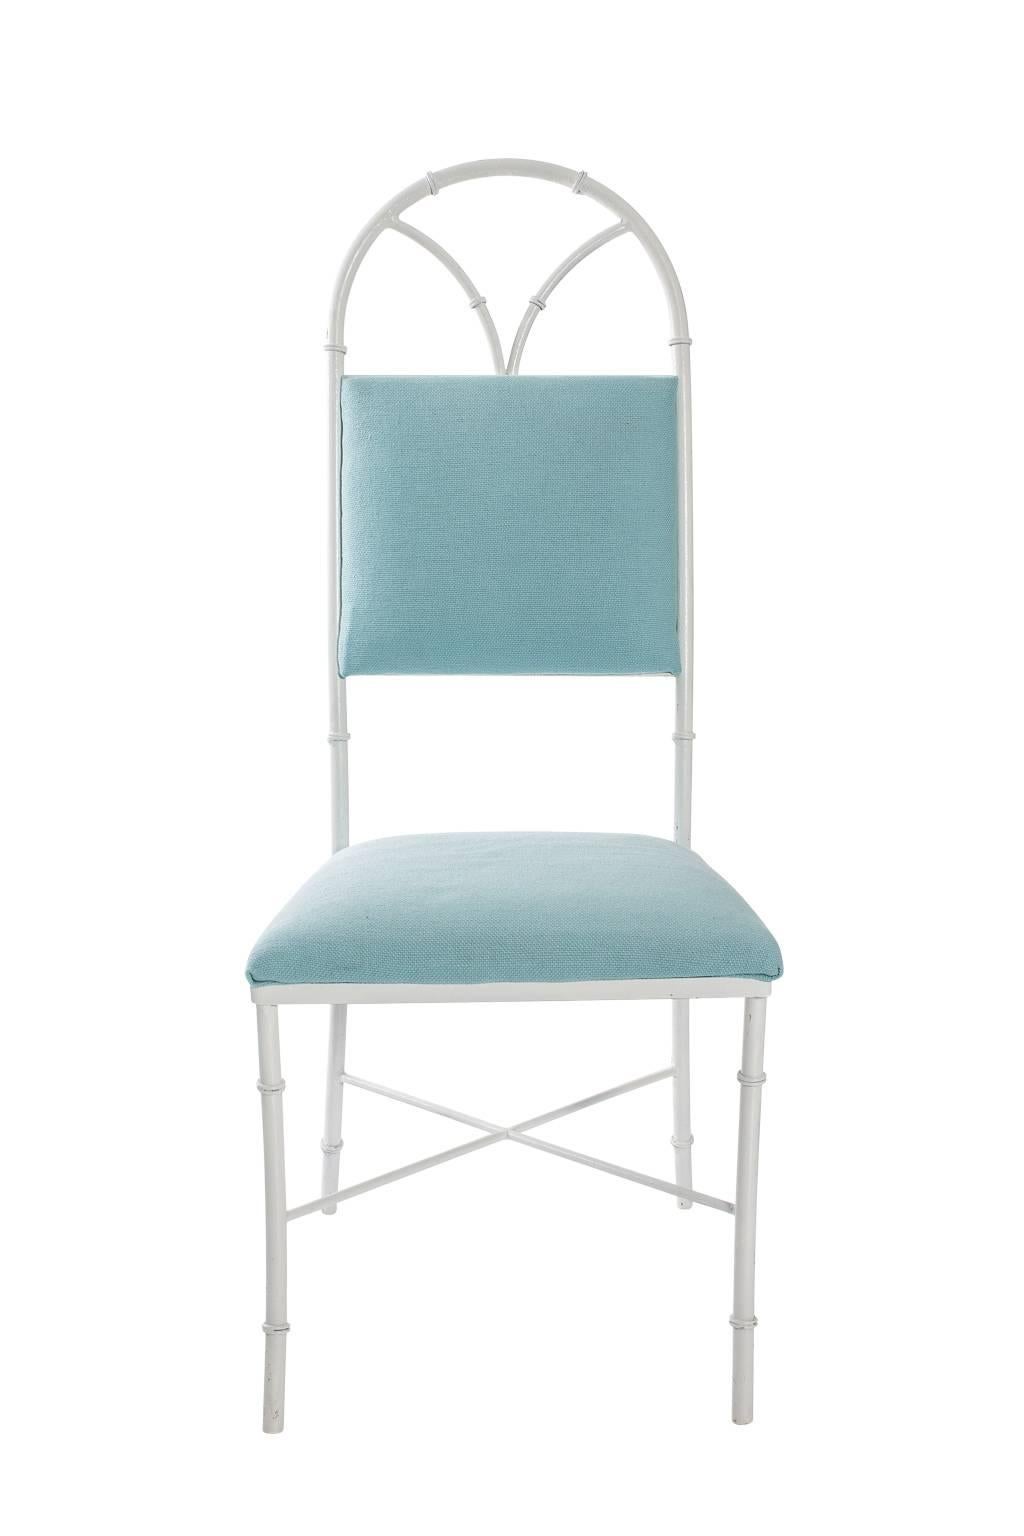 Pair of French, white-painted iron, faux bamboo chairs. Upholstered in pale blue.